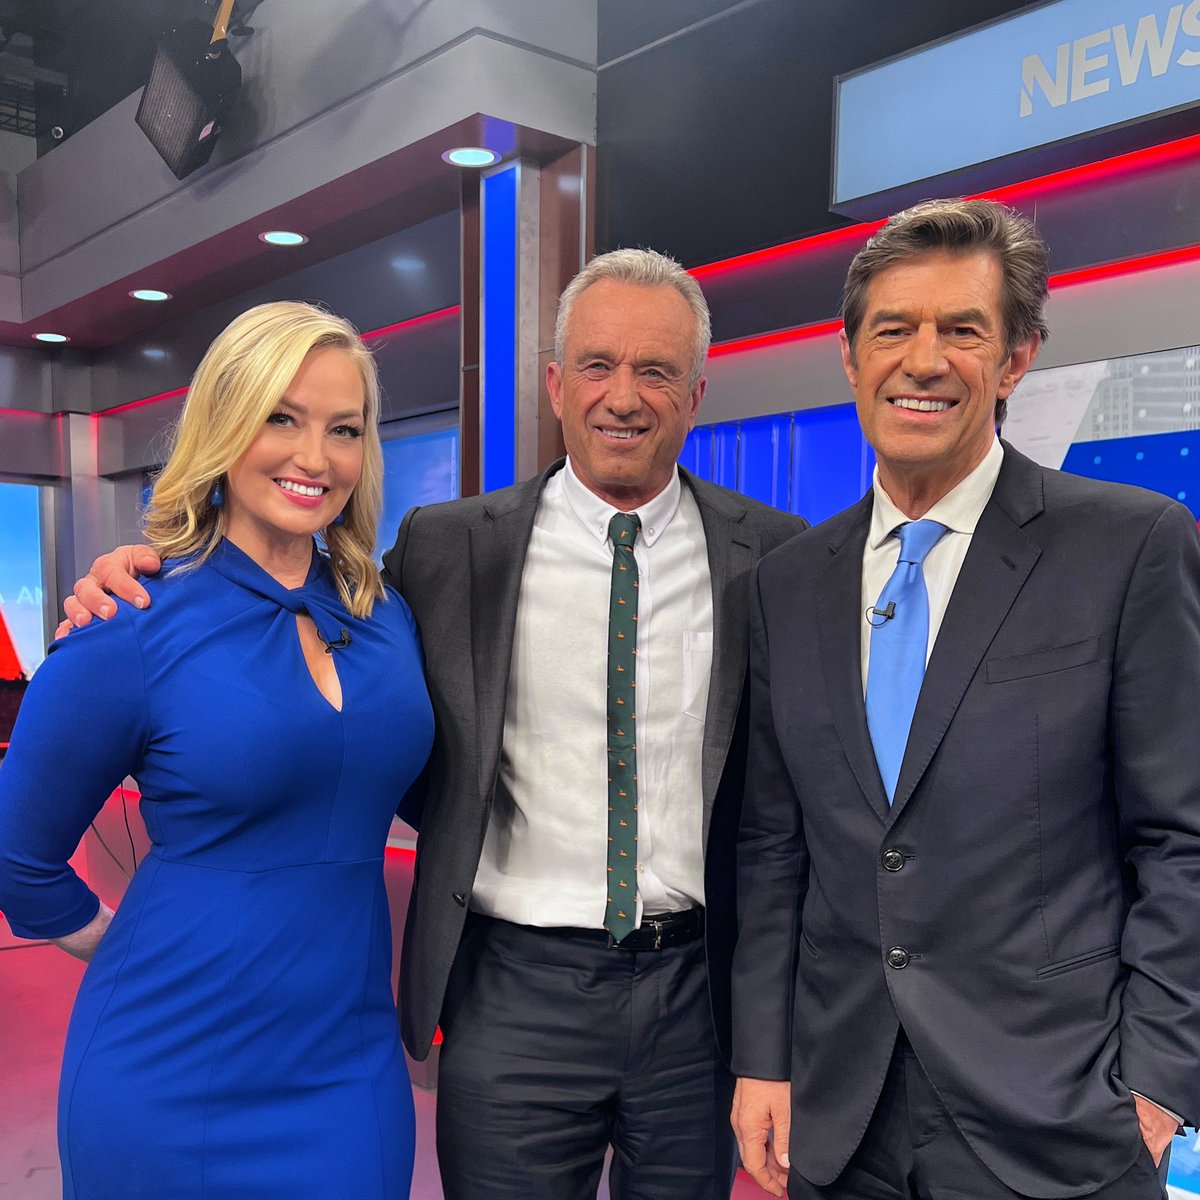 Thank you @RobertKennedyJr for the candid and insightful conversation today. 

@NEWSMAX @BobSellersTV @DNC #presidentialcandidate #election #USA